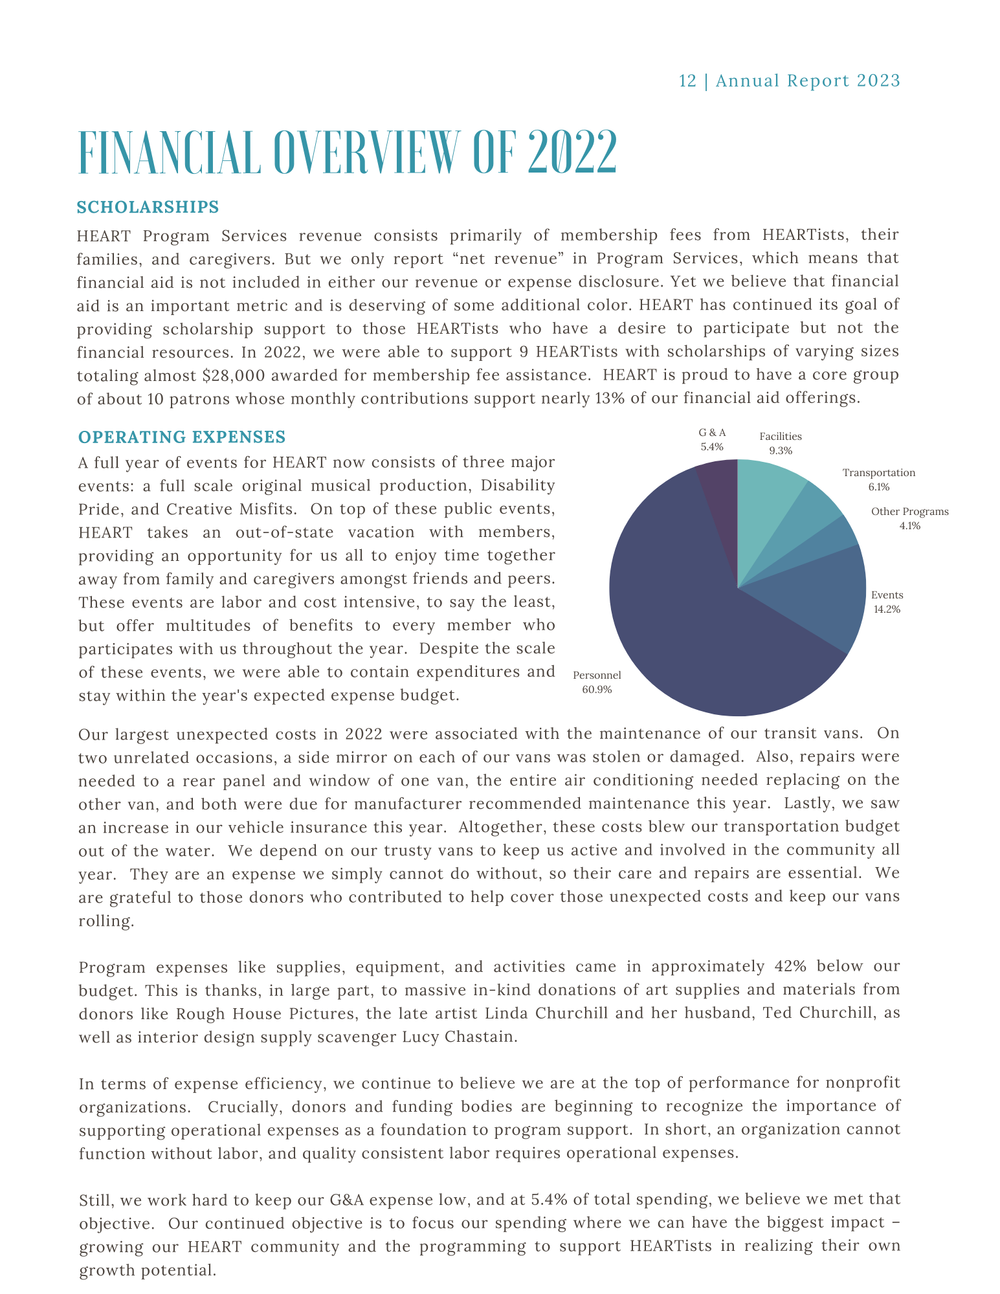 Financial Overview of 2022